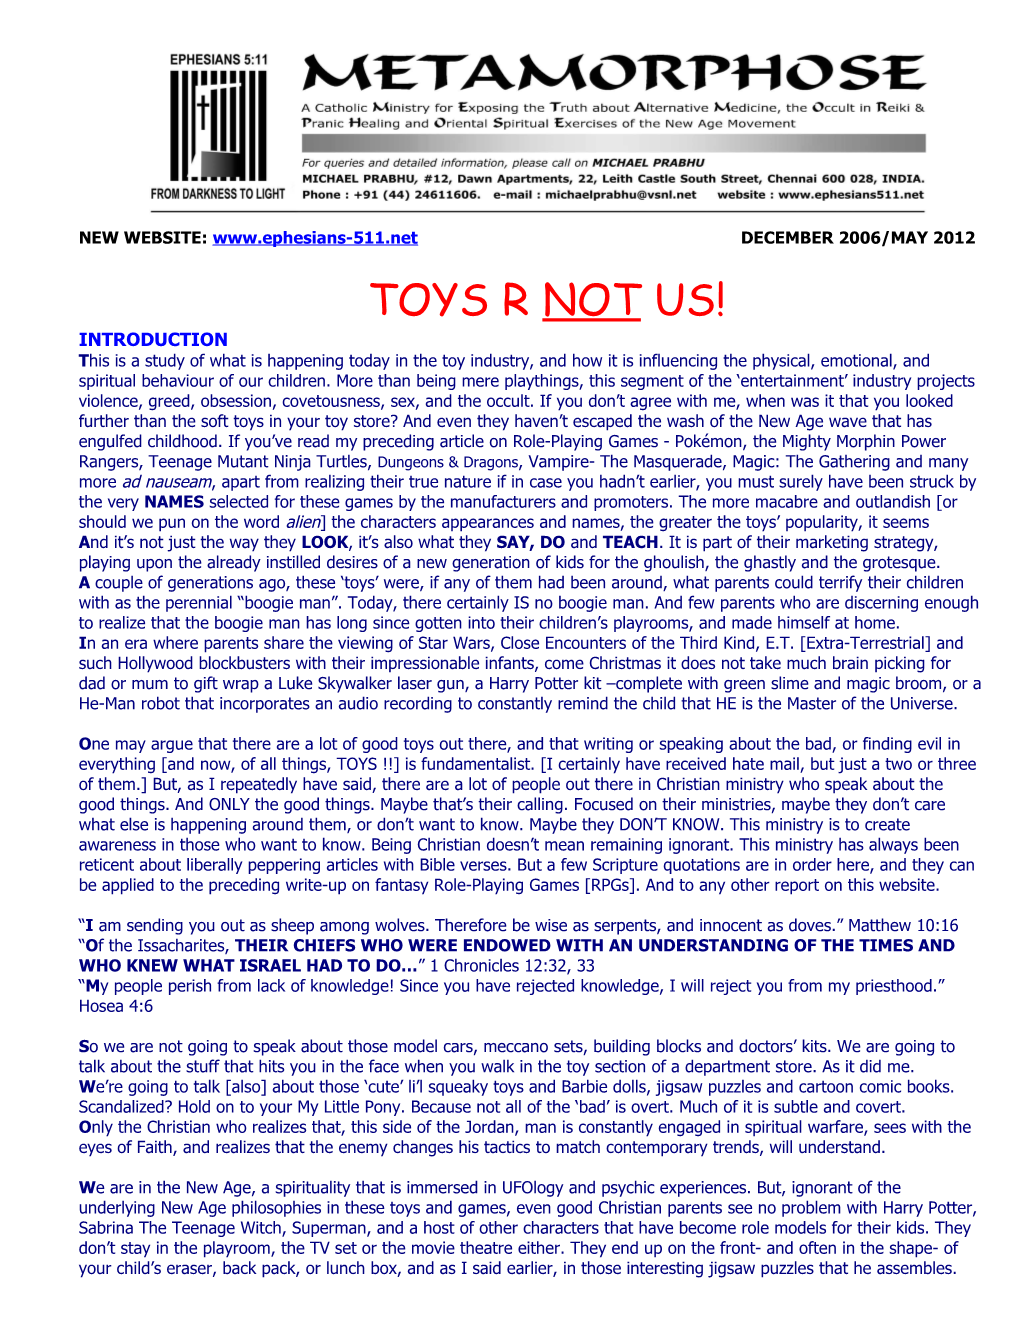 This Is a Study of What Is Happening Today in the Toy Industry, and How It Is Influencing